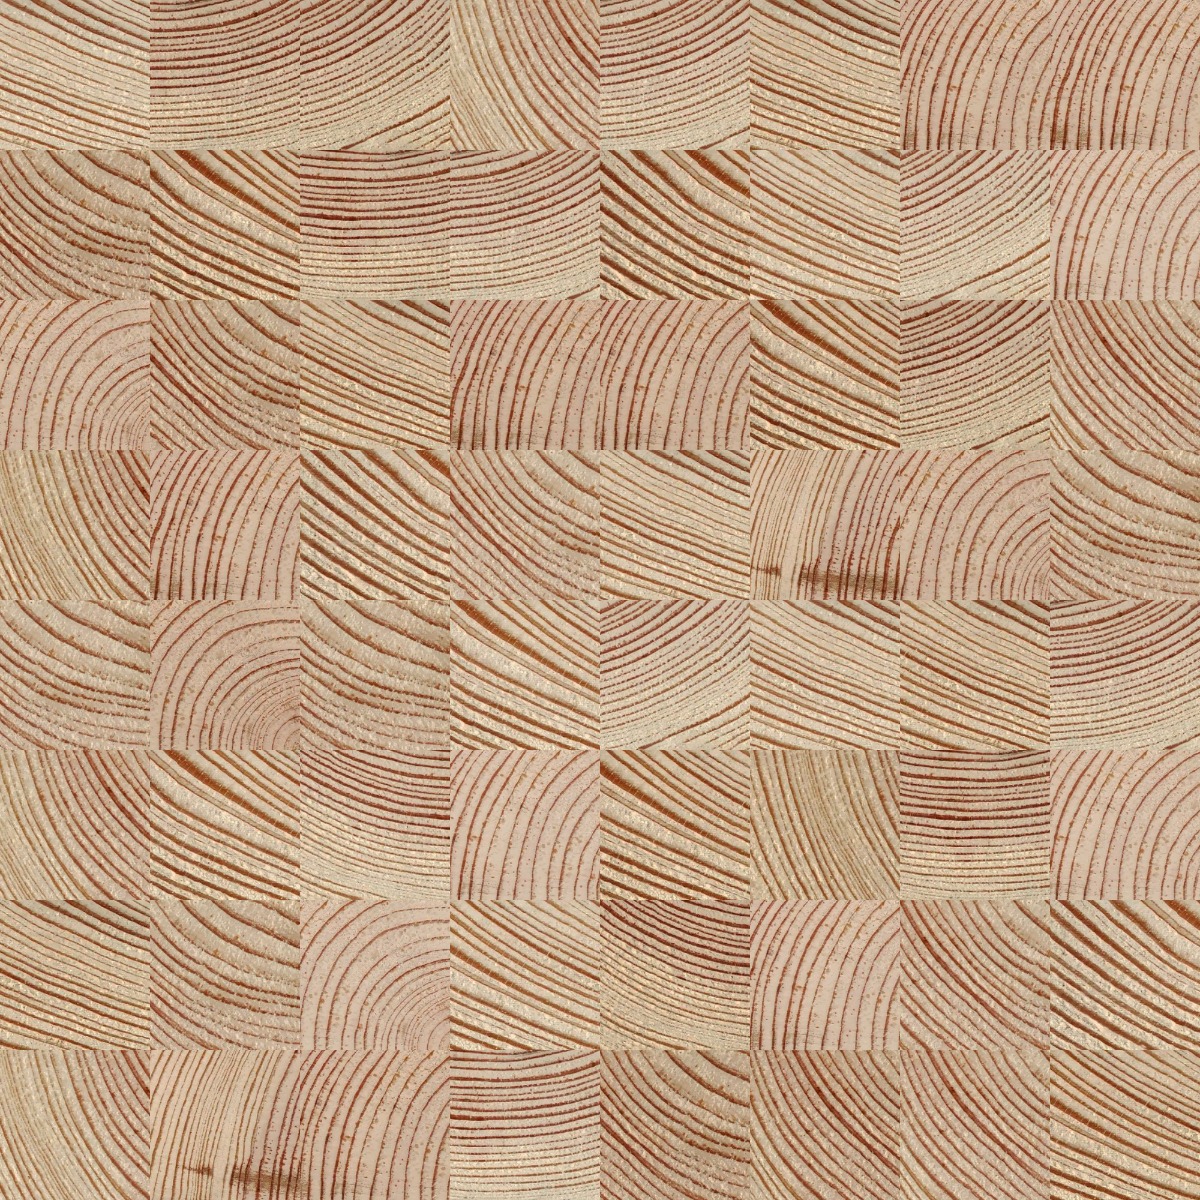 A seamless wood texture with timber end grain boards arranged in a Stack pattern